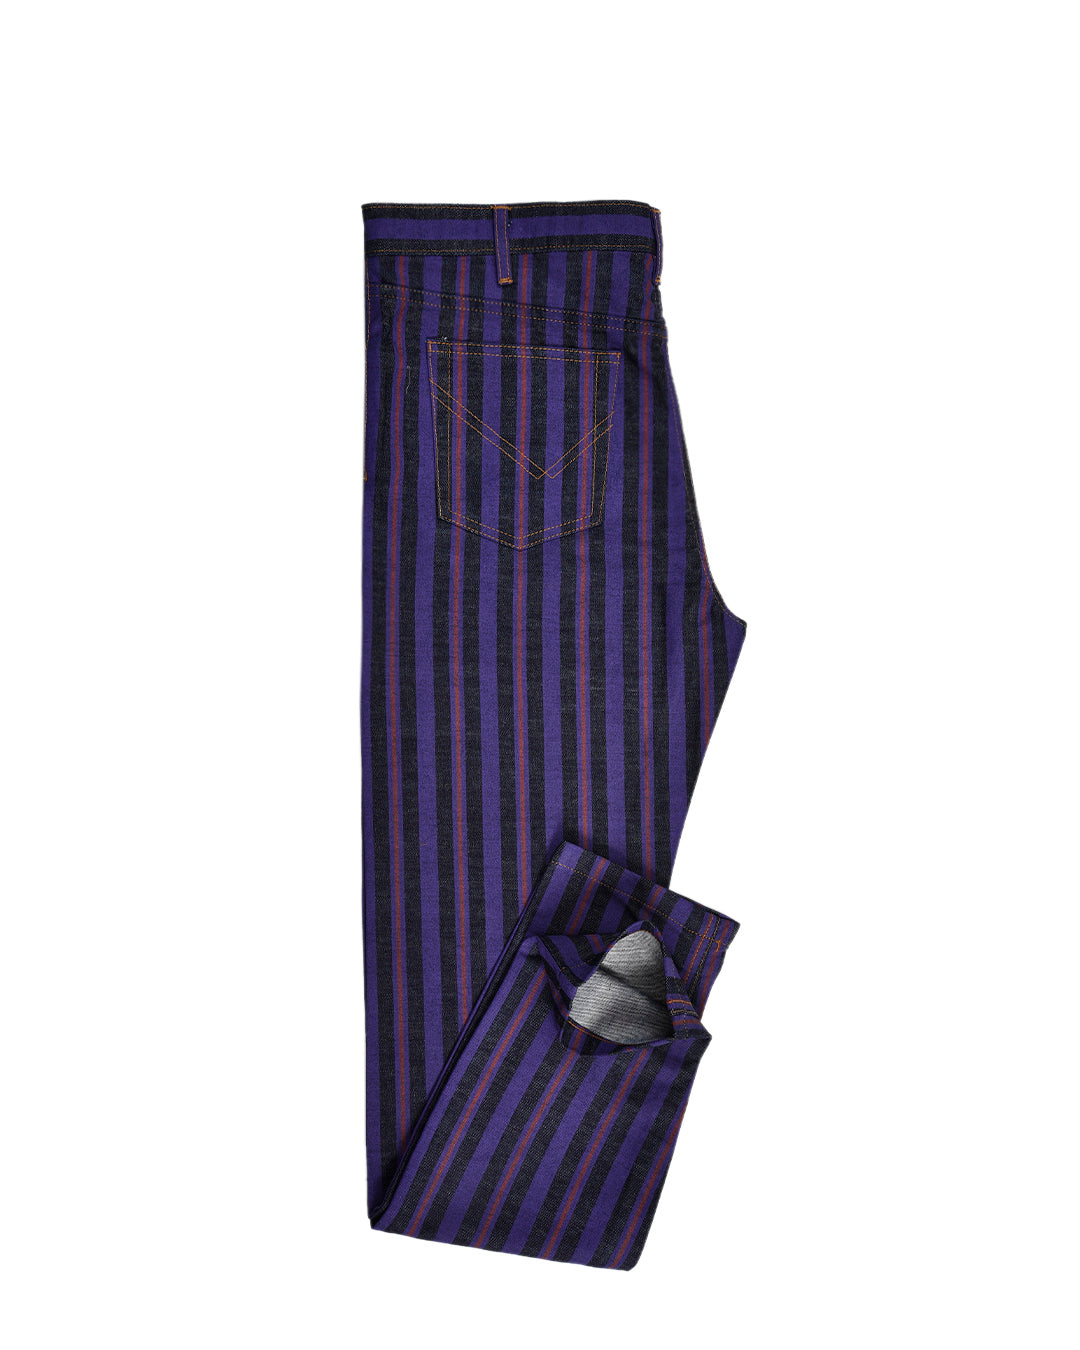 Side view of custom denim jeans for men by Luxire with purple stripes 2